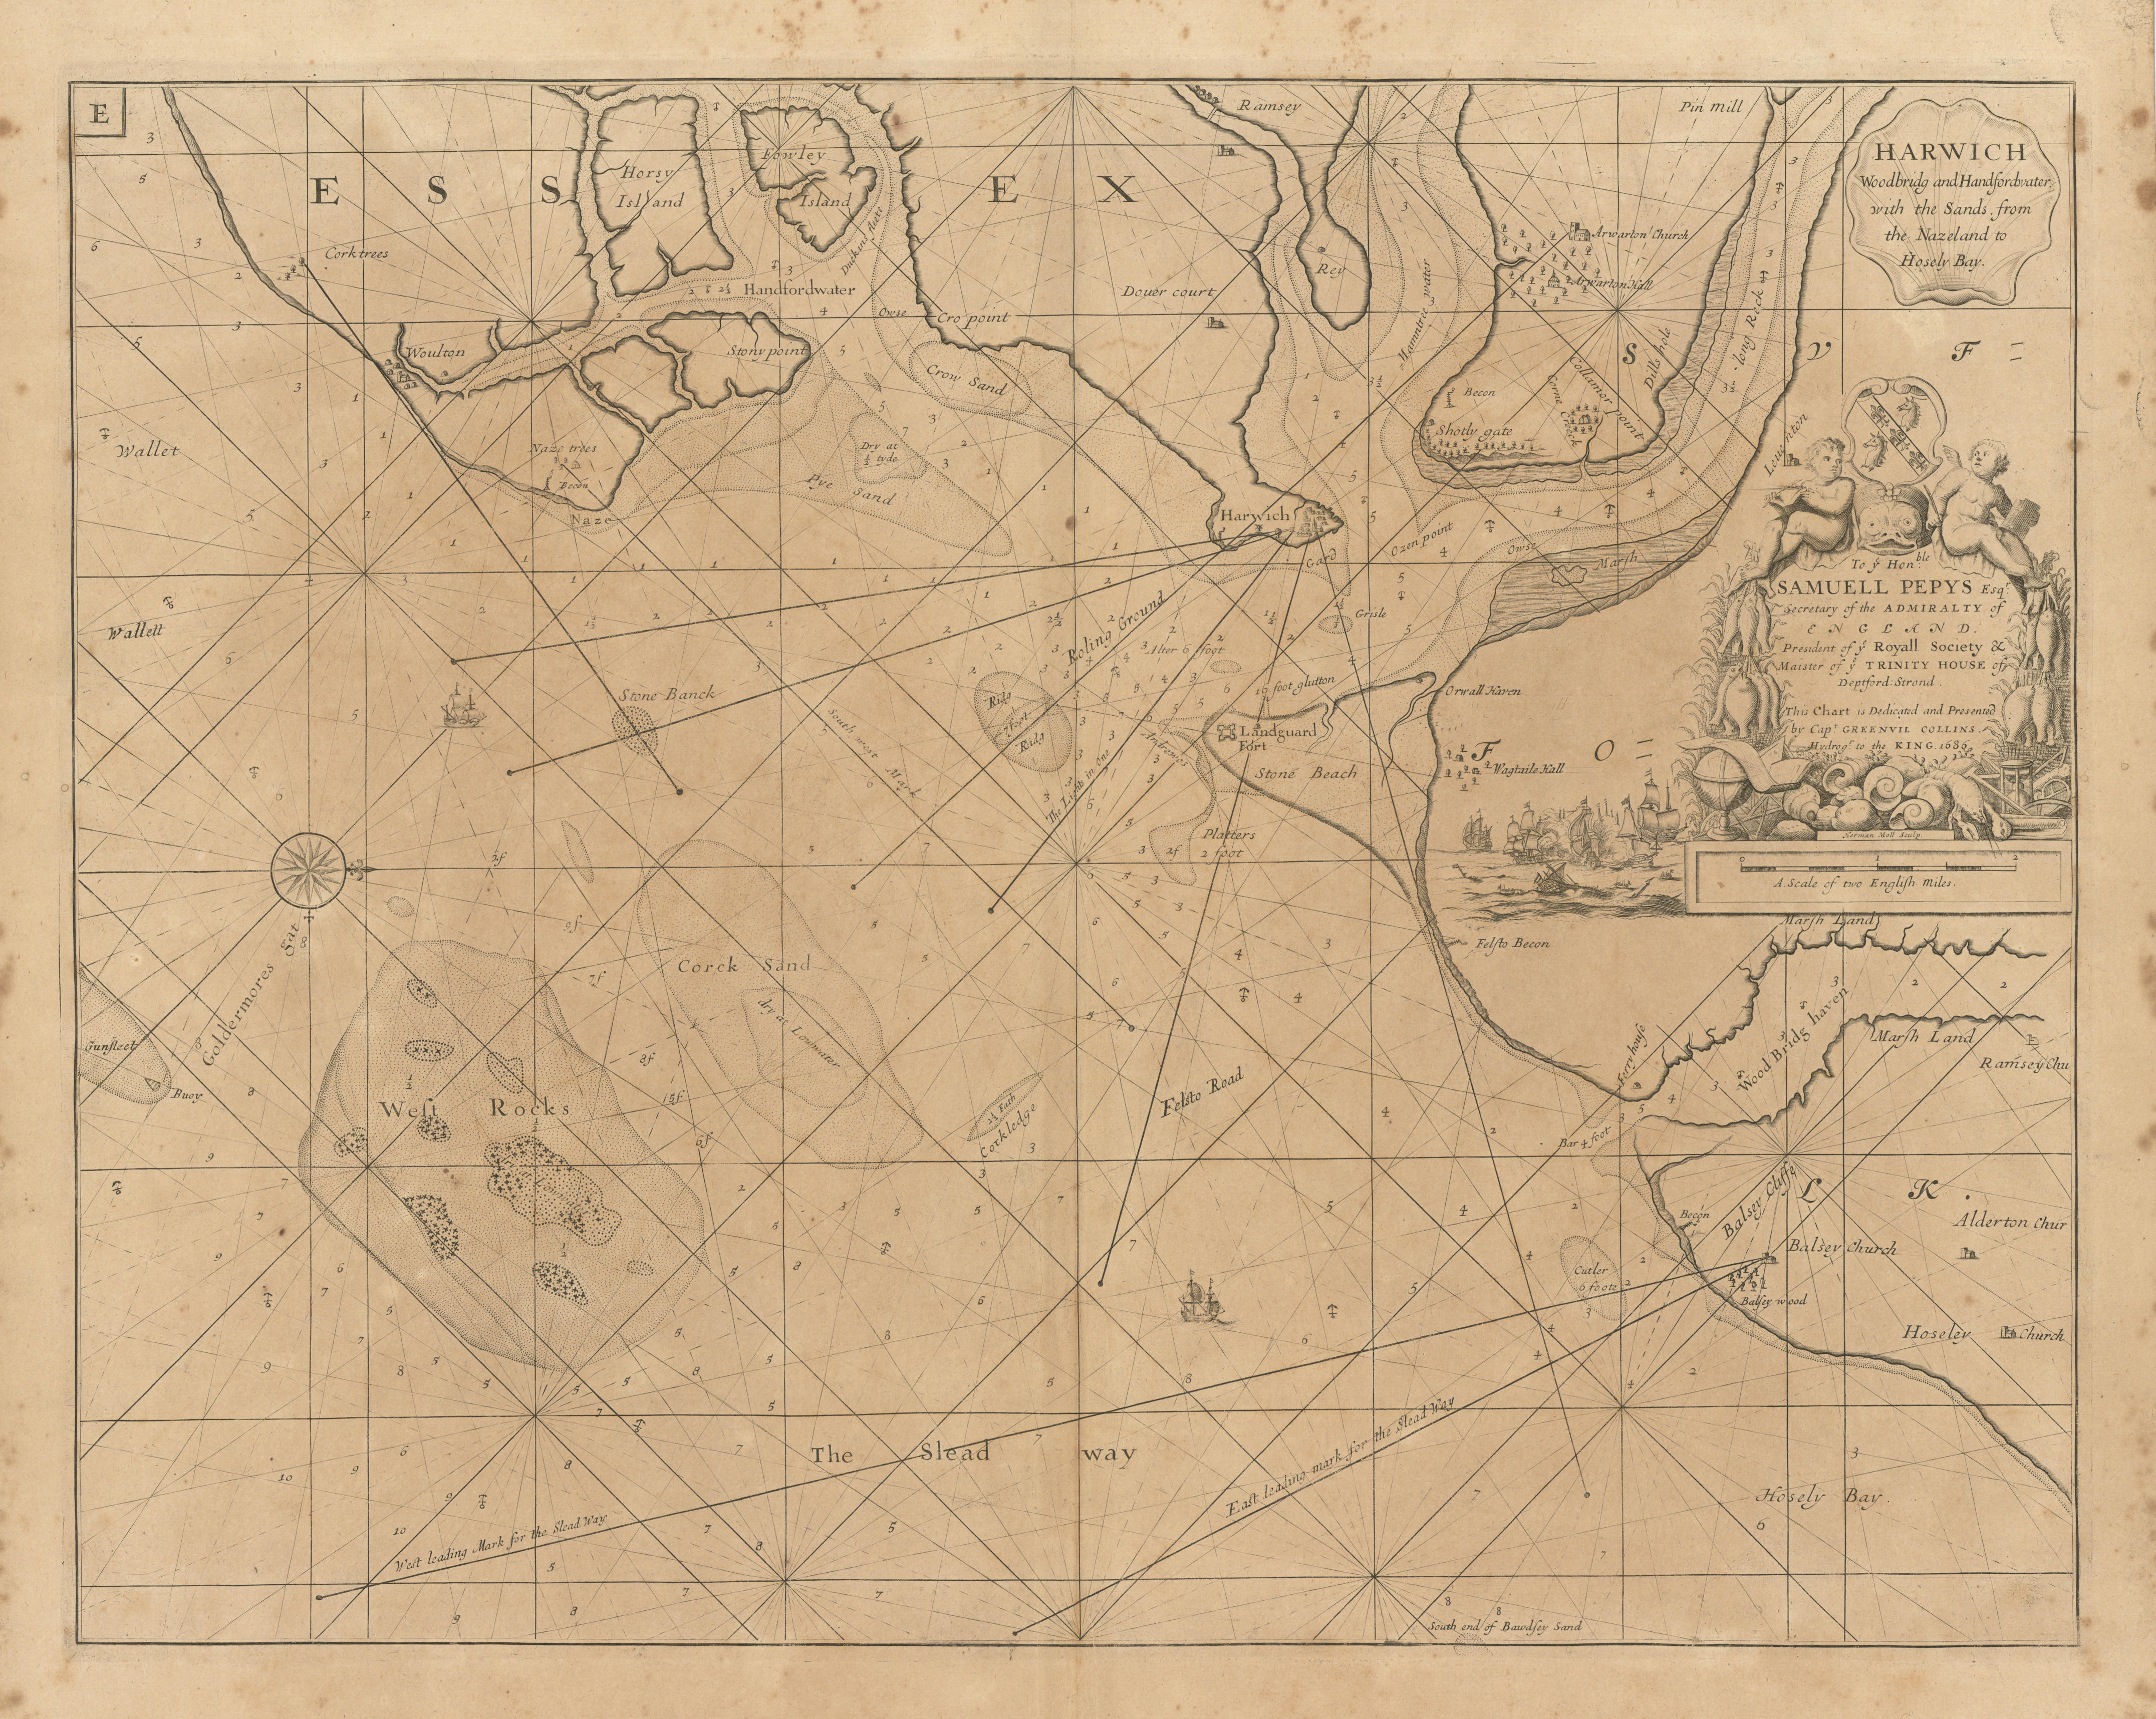 Associate Product HARWICH, Orwell, Stour, Deben & Hamford Water sea chart. COLLINS 1693 old map